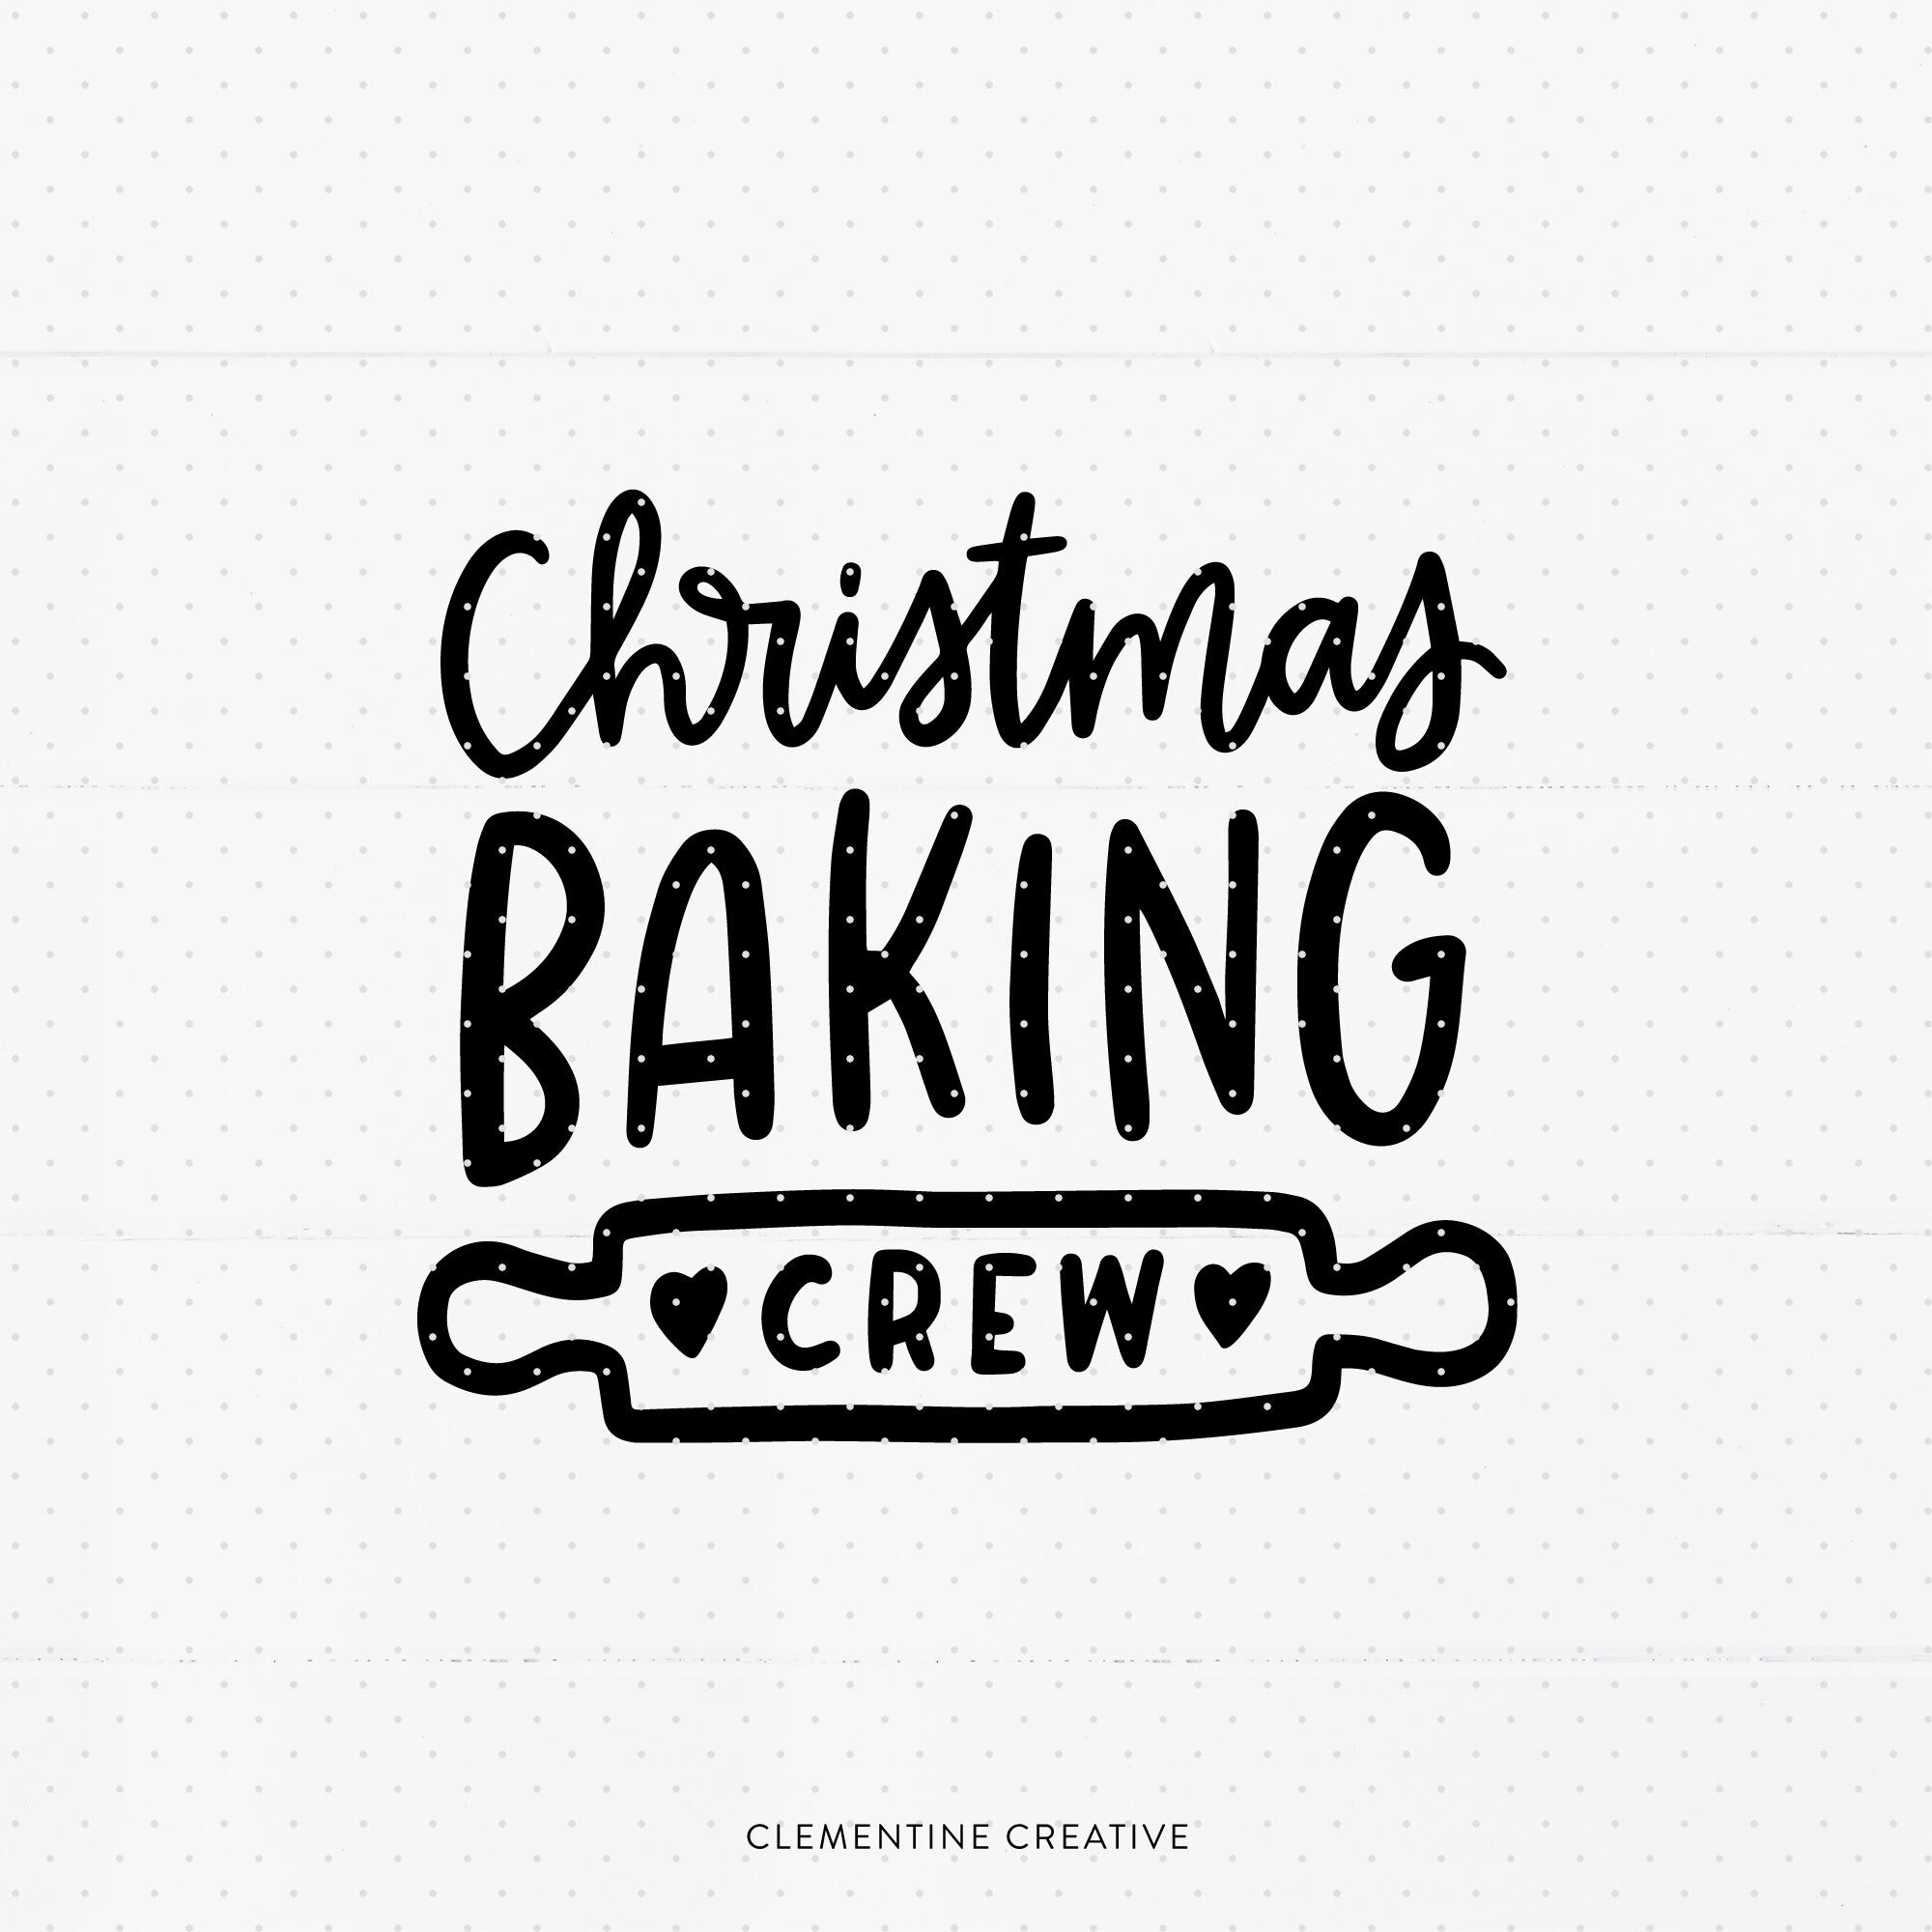 Download Christmas Baking Crew Svg Christmas Baking Svg Holiday T Shirt Svg By Clementine Creative Thehungryjpeg Com